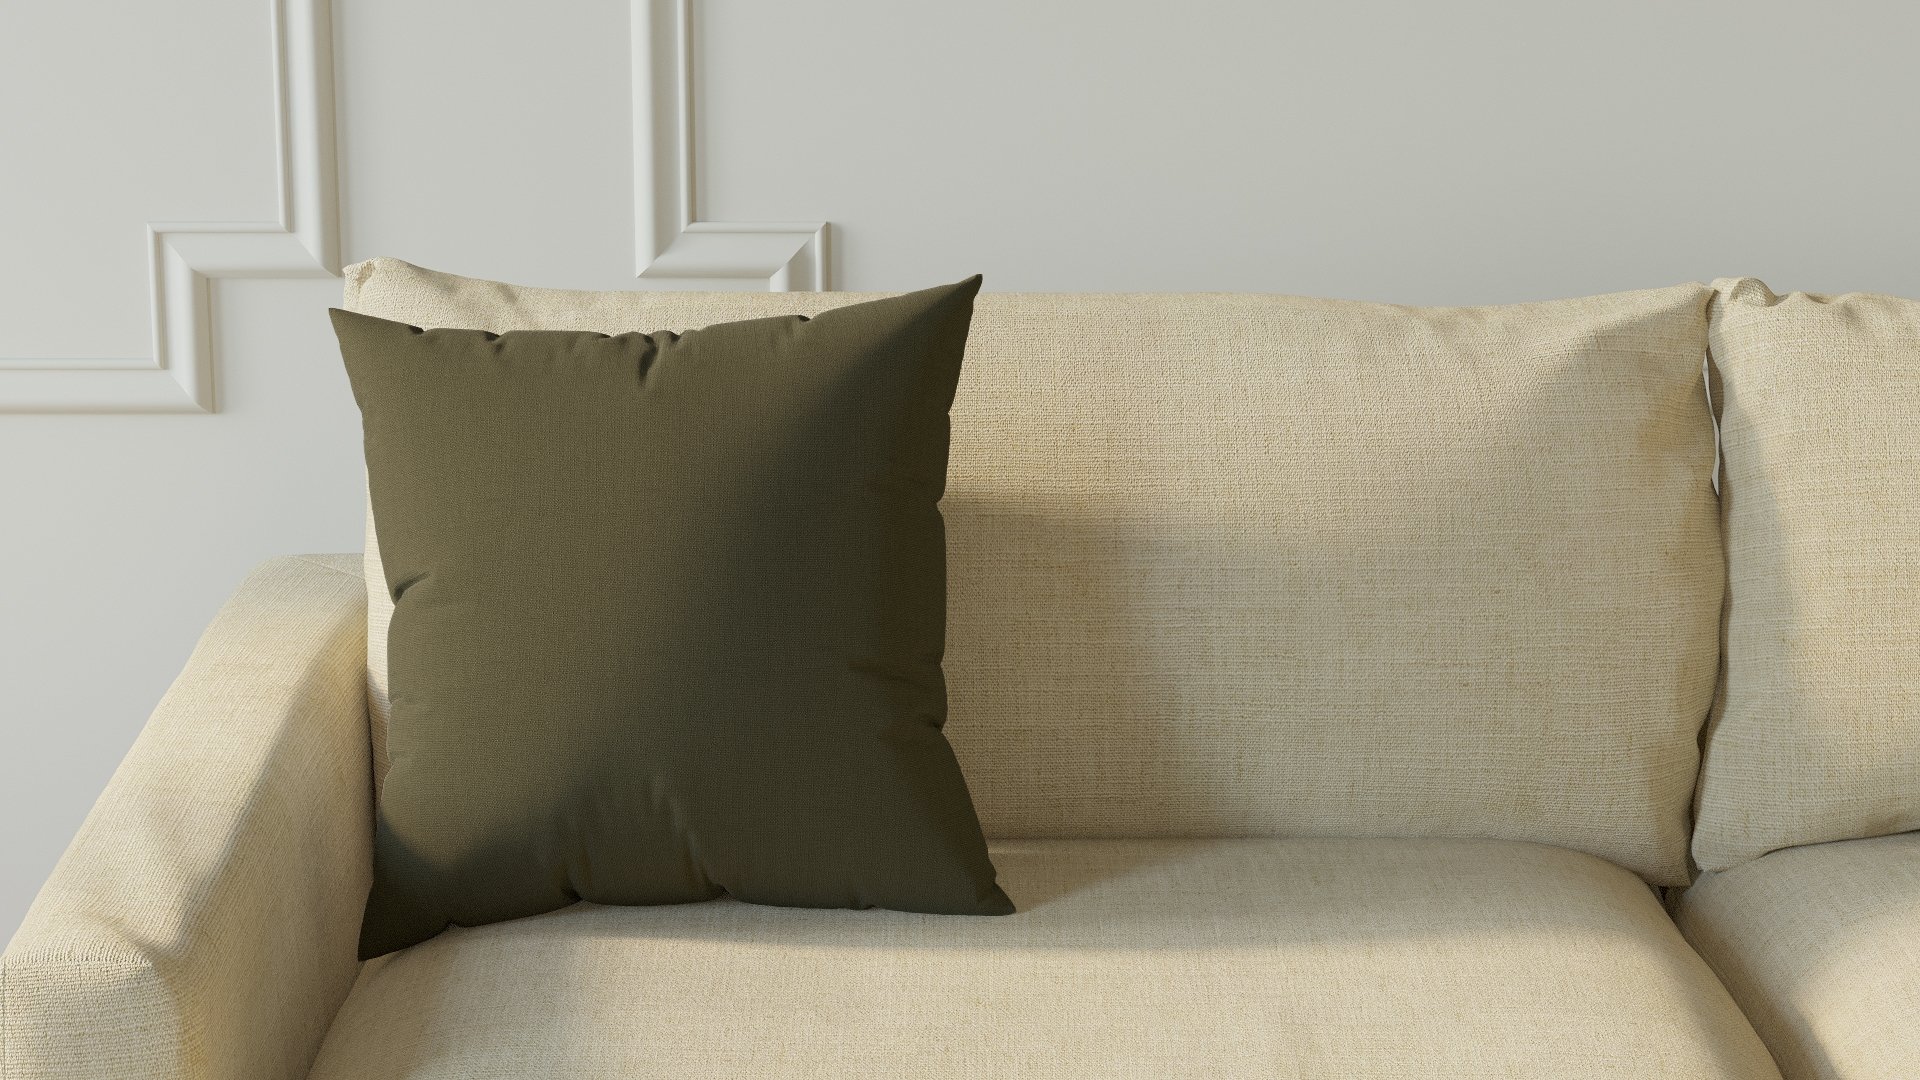 Throw Pillow 18", Olive Everyday Linen, 18" x 18" - Image 2